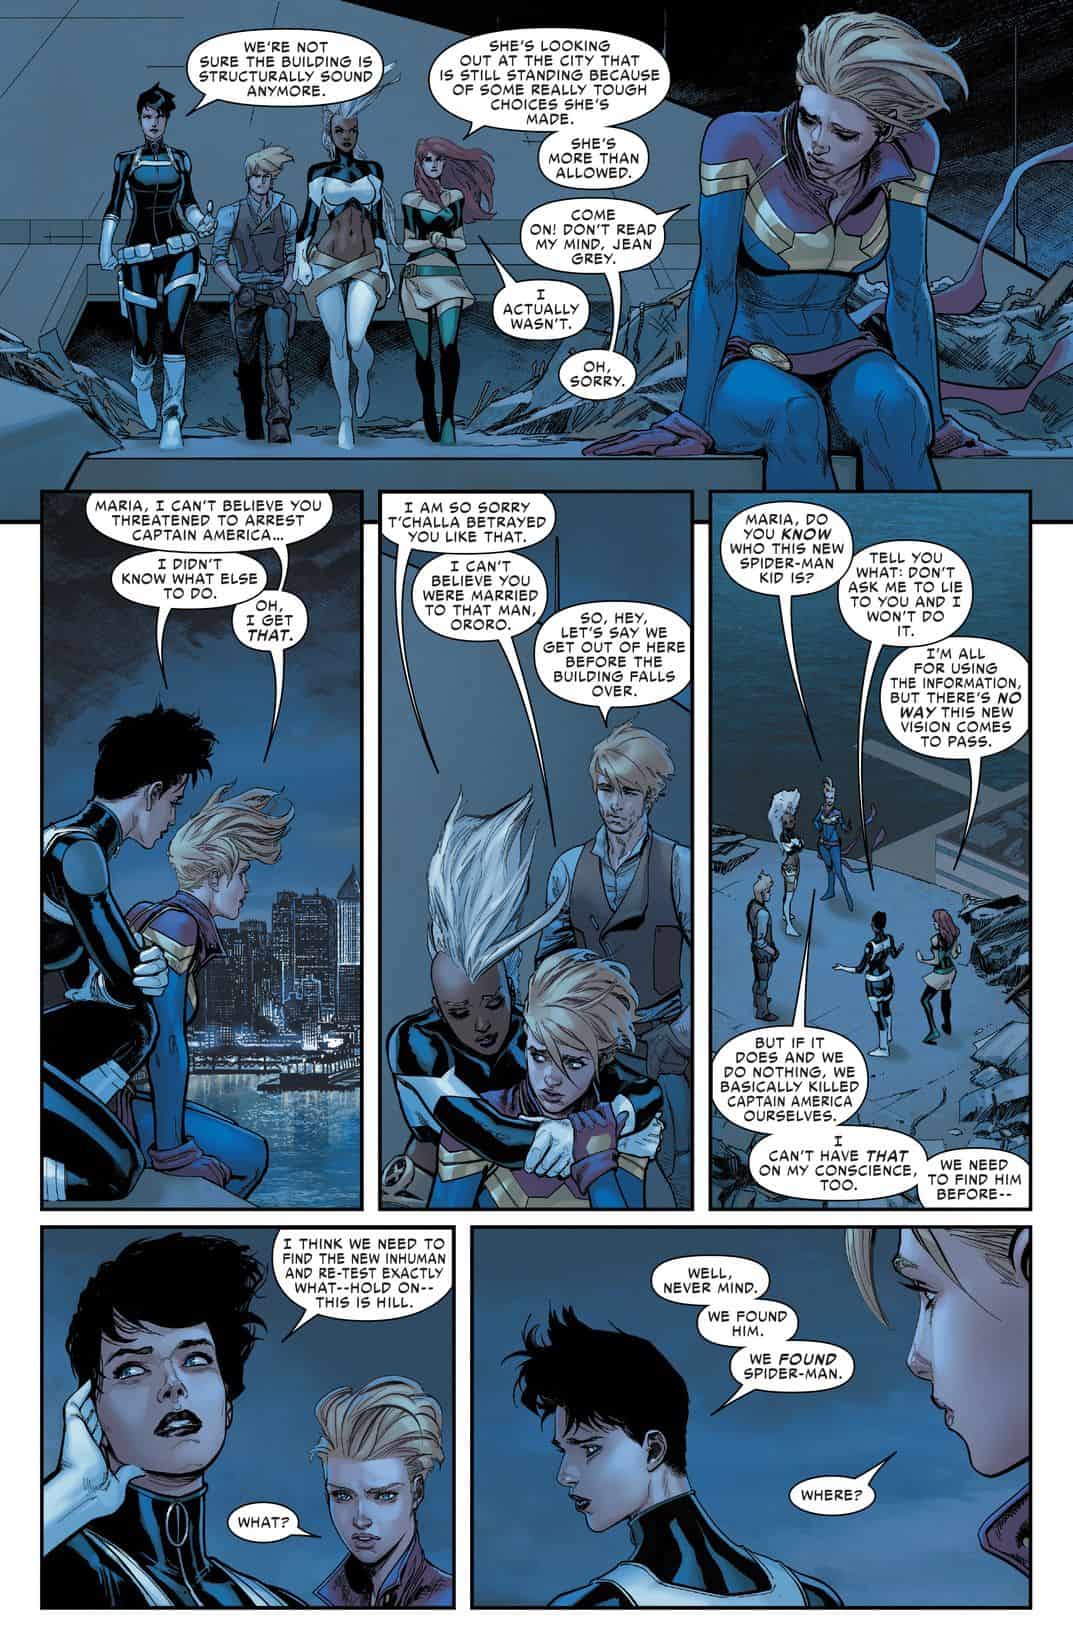 Civil War Ii Spoilers And Review Civil War Ii 6 A Miles Morales Spider Man Feature That Sets Up